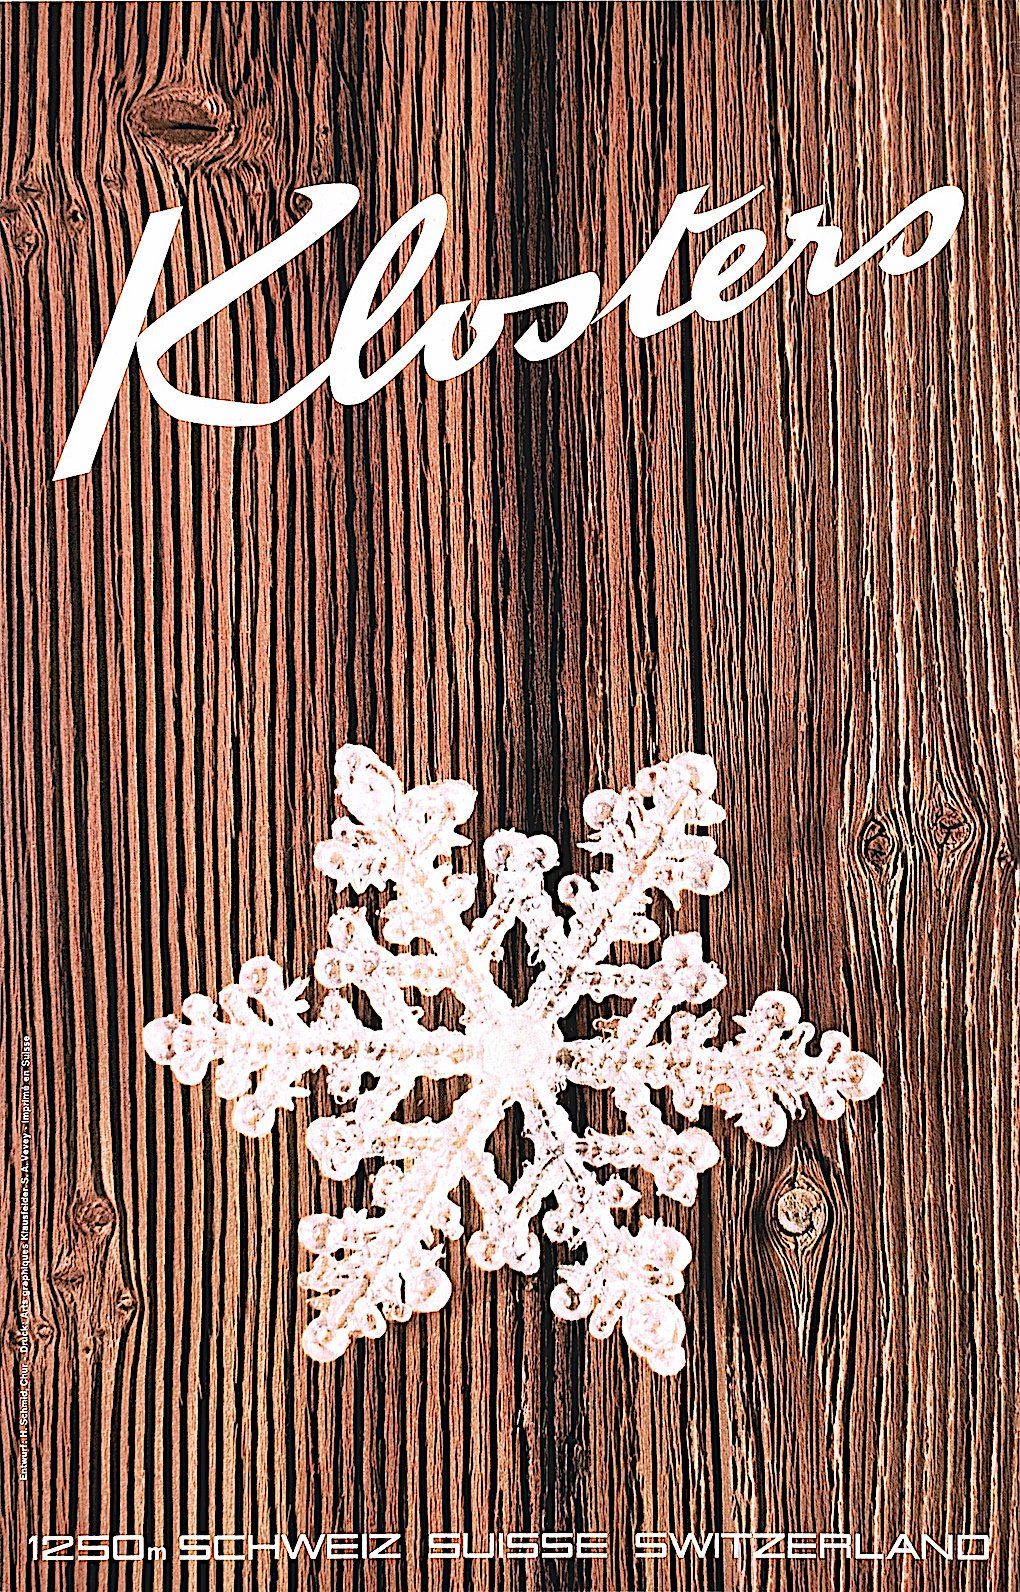 a Hans Schmid 1965 advertising poster for Klosters, with illustrated wood grain